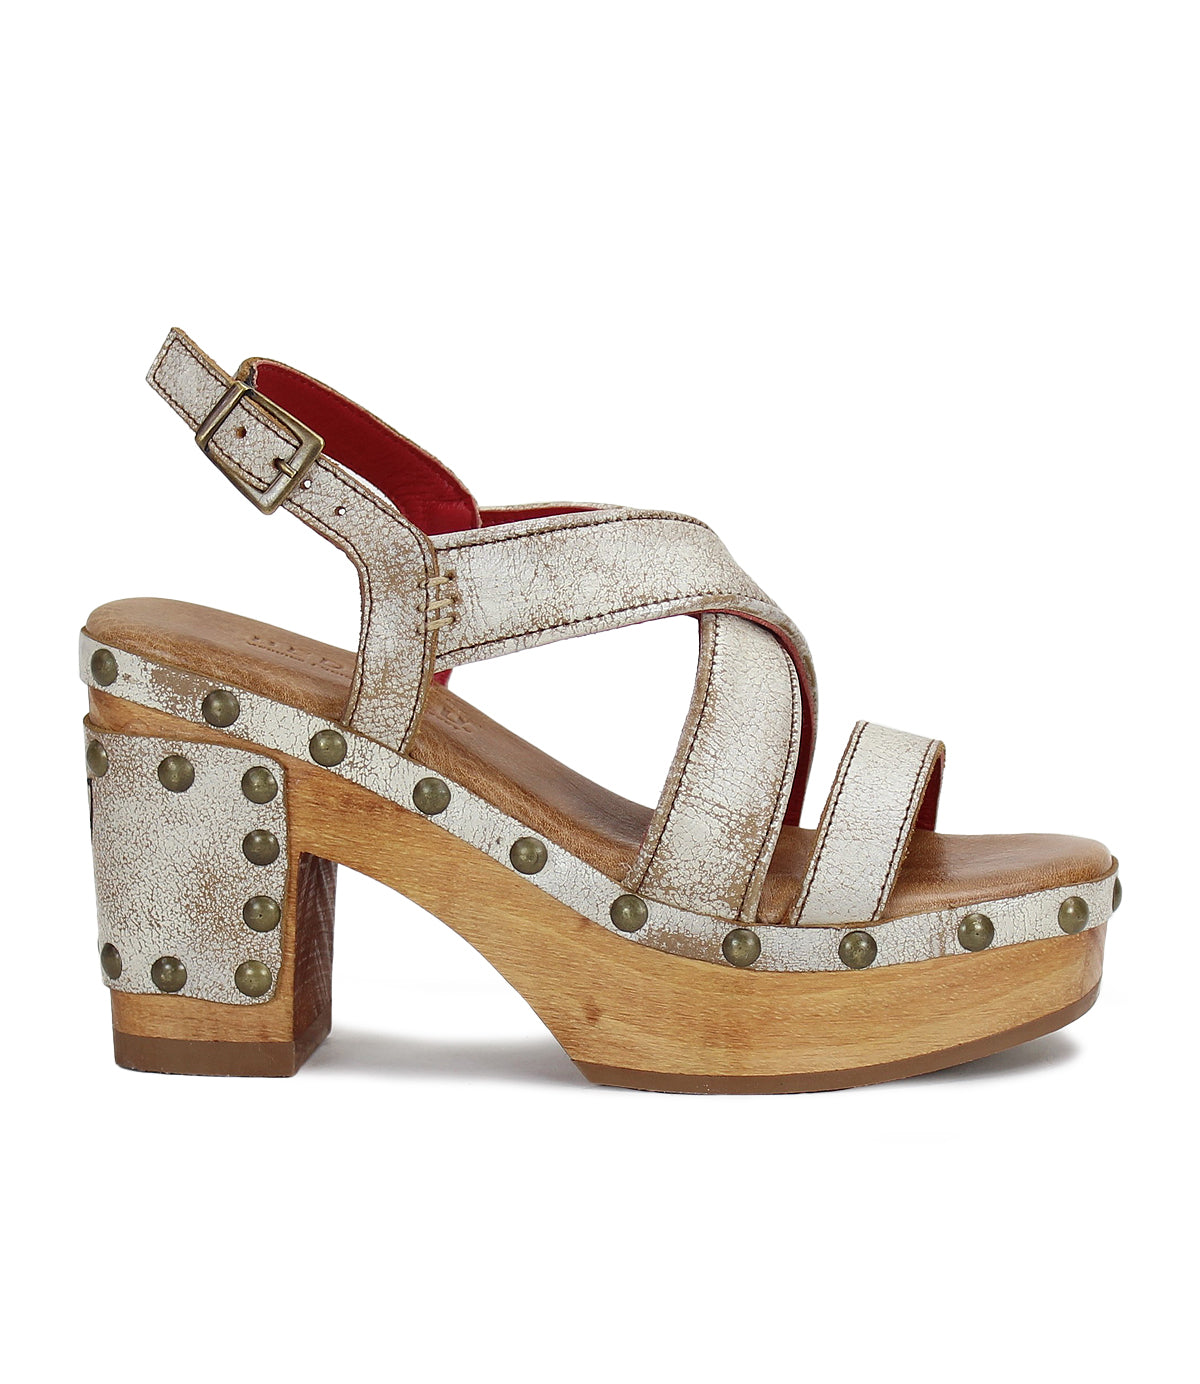 A single platform sandal with wooden soles studded with golden rivets, featuring white and red leather straps and a buckle closure, perfect for the fashionista looking to elevate her accessories game by Bed|Stü's 'Shop the Look' Bundle! 🌸